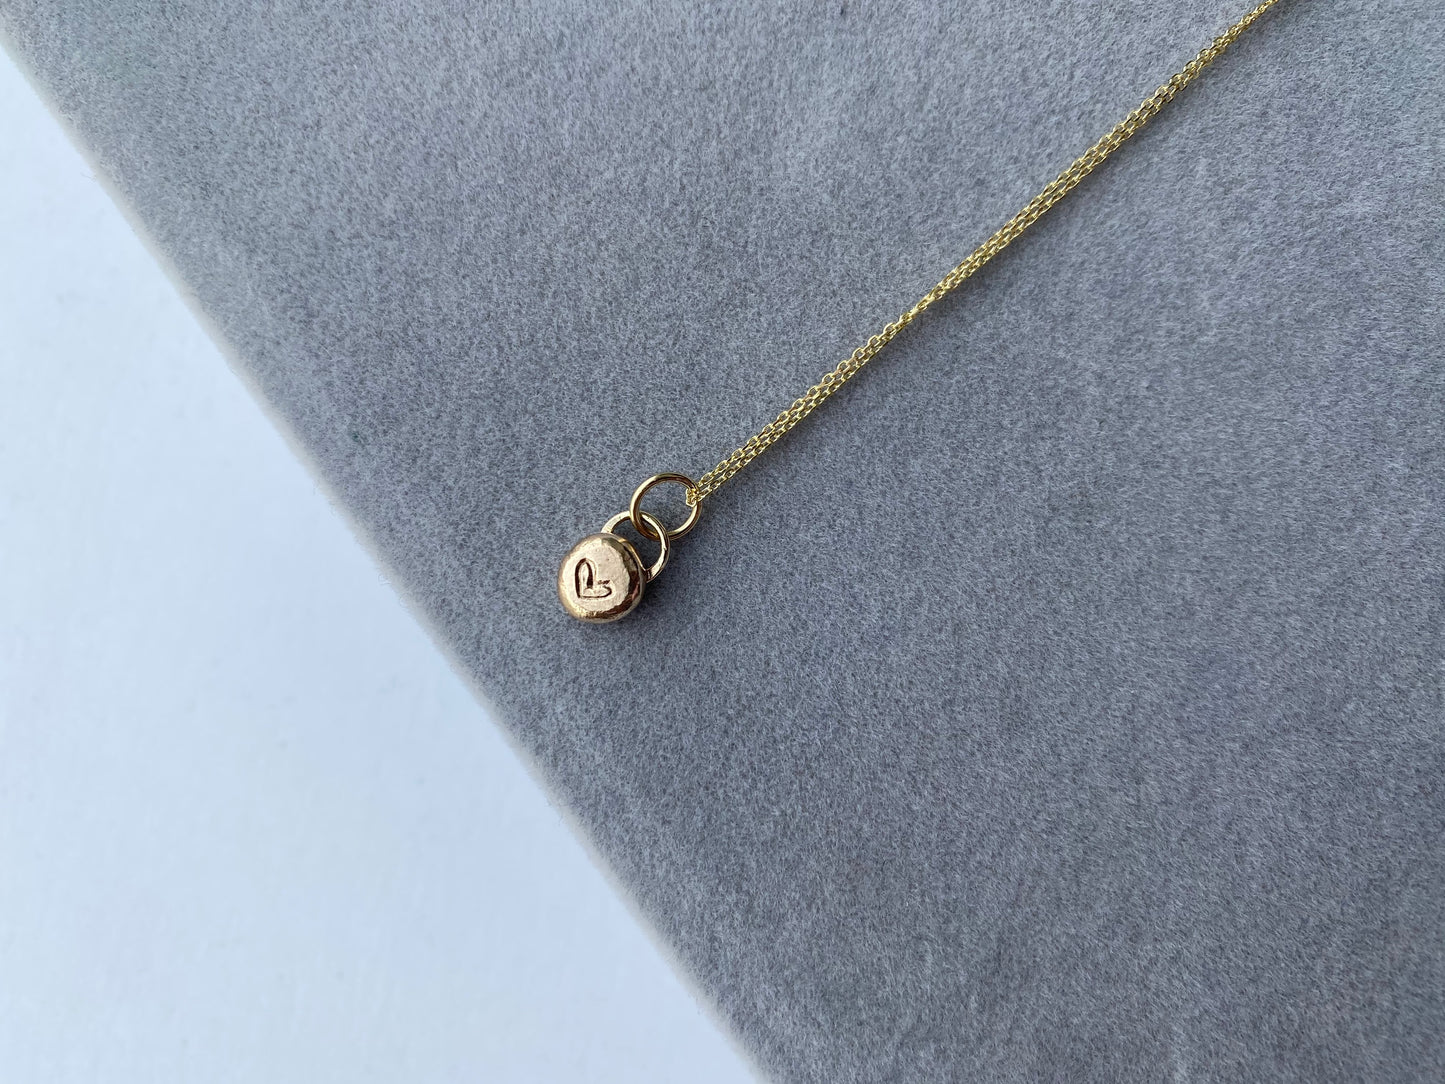 Solid 9ct yellow gold nugget necklace - heart